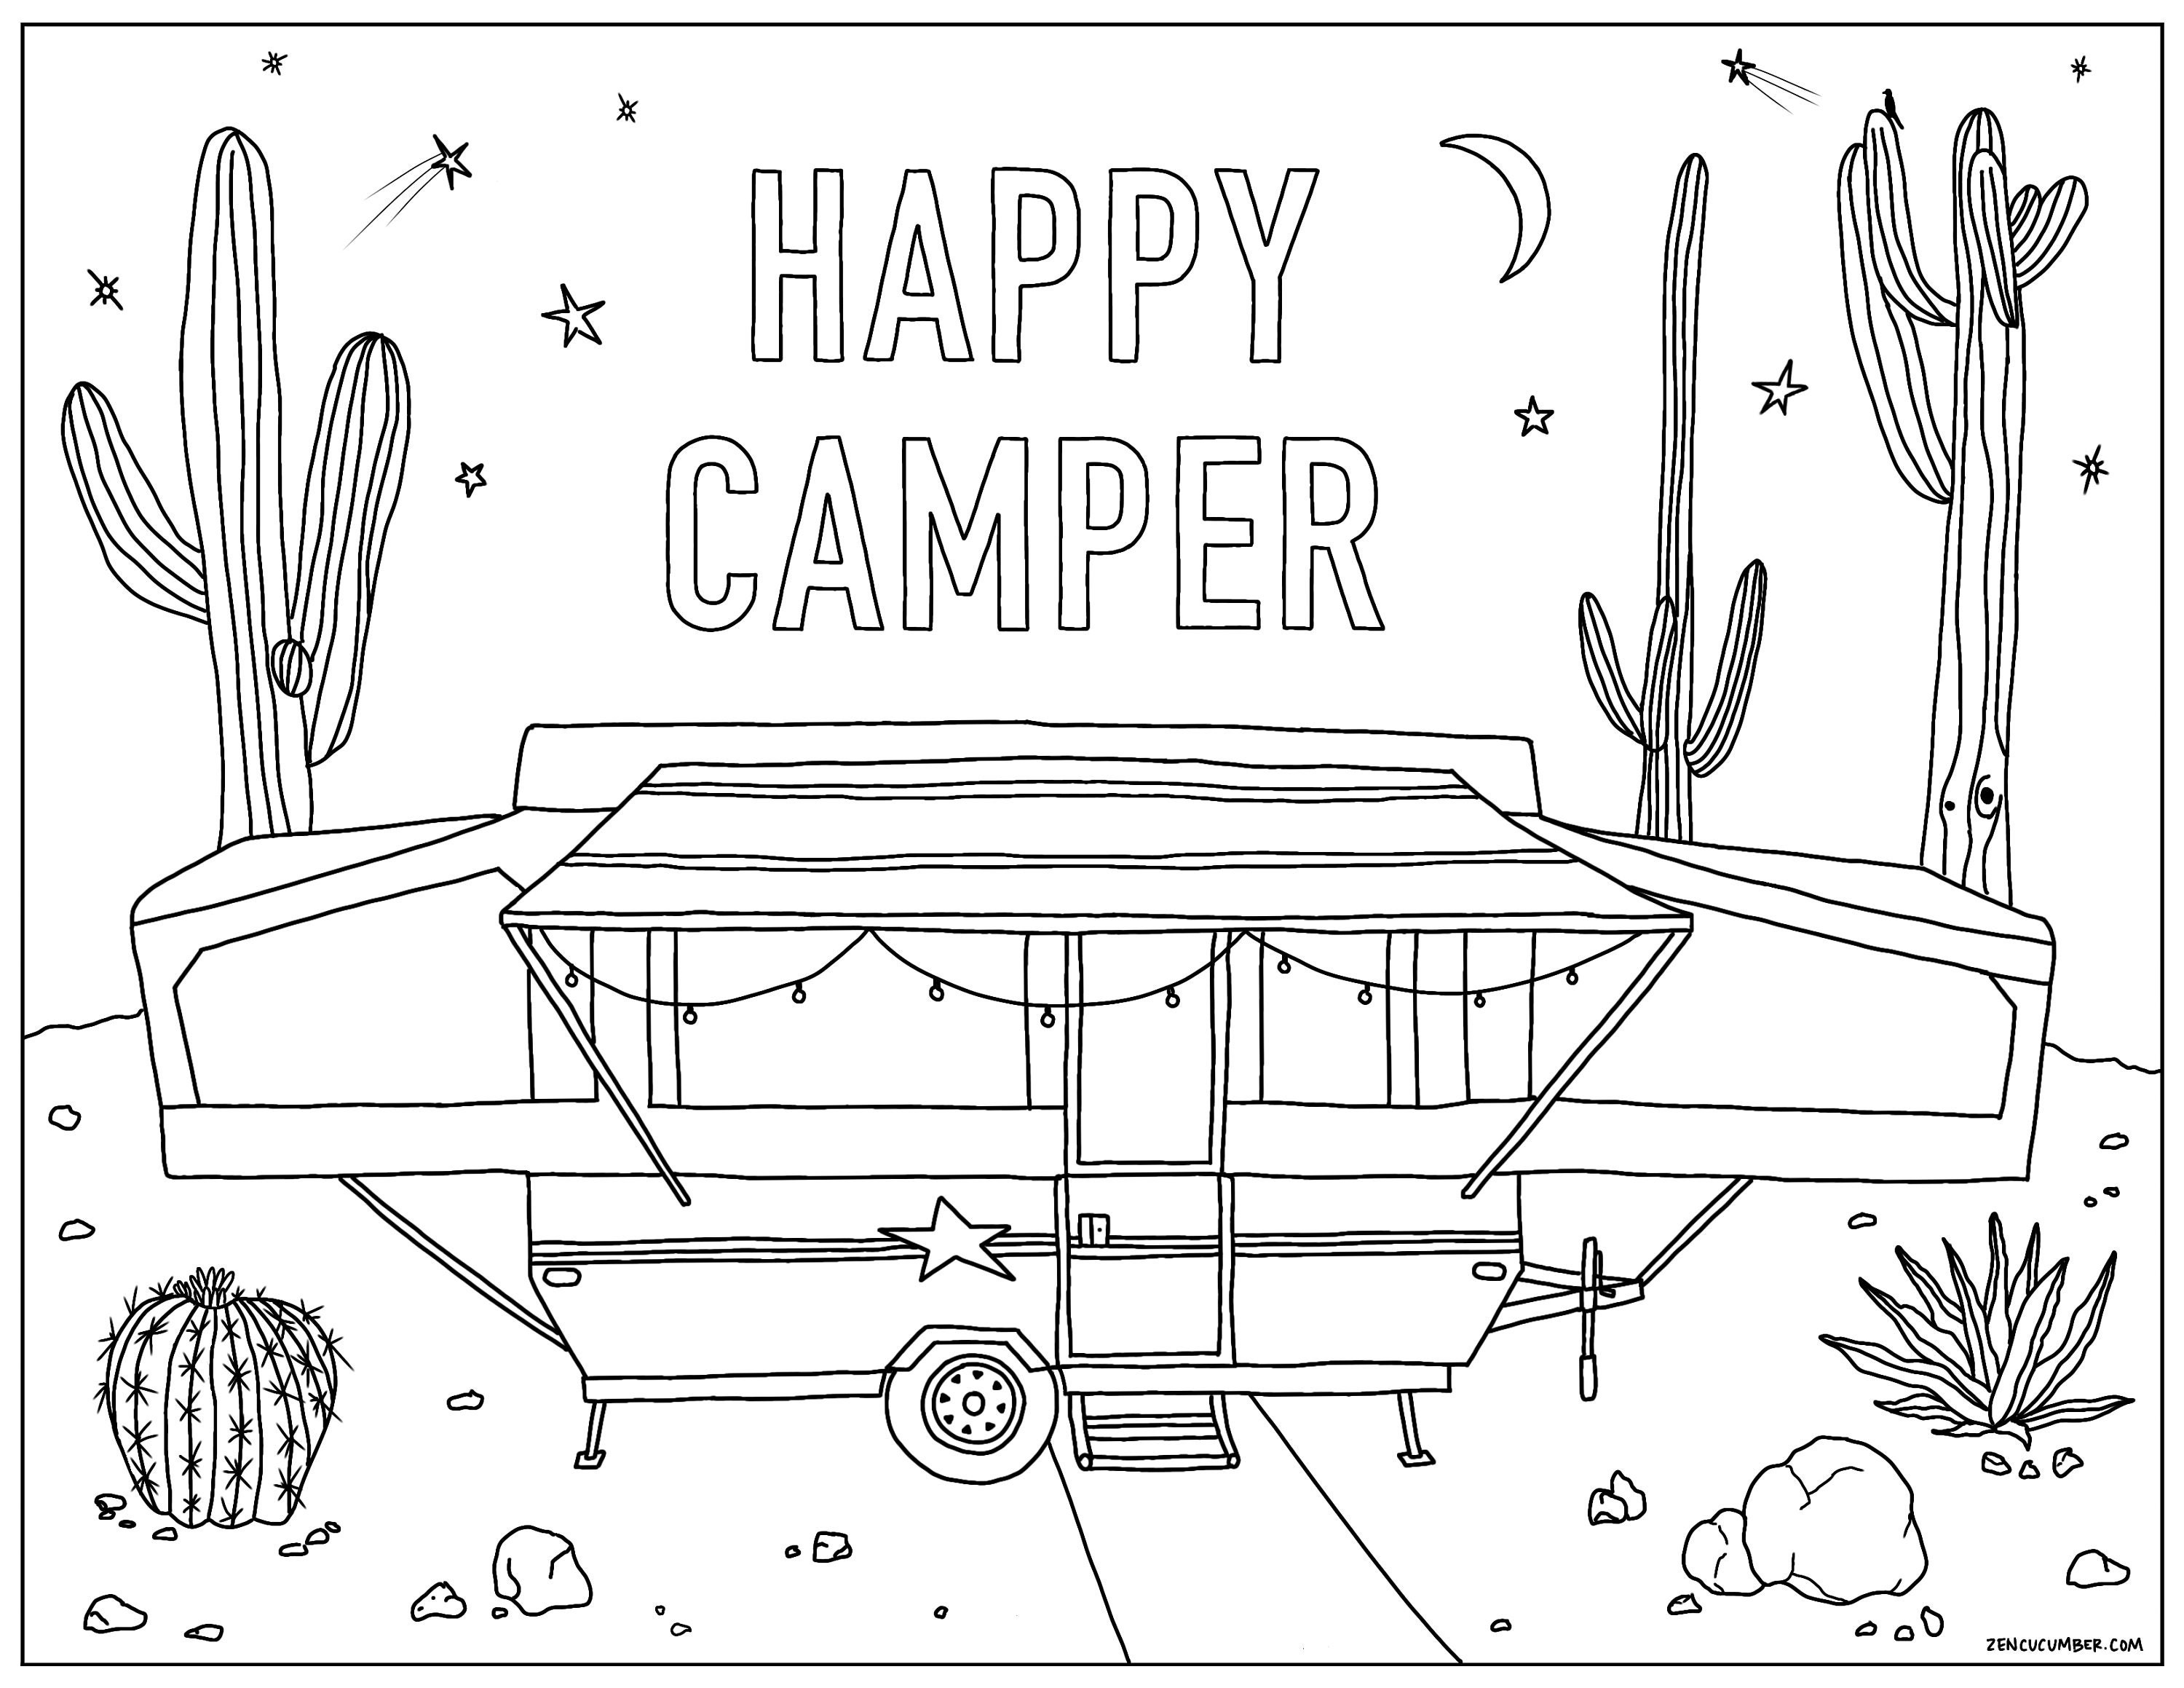 vintage-camper-coloring-page-free-printable-coloring-pages-images-and